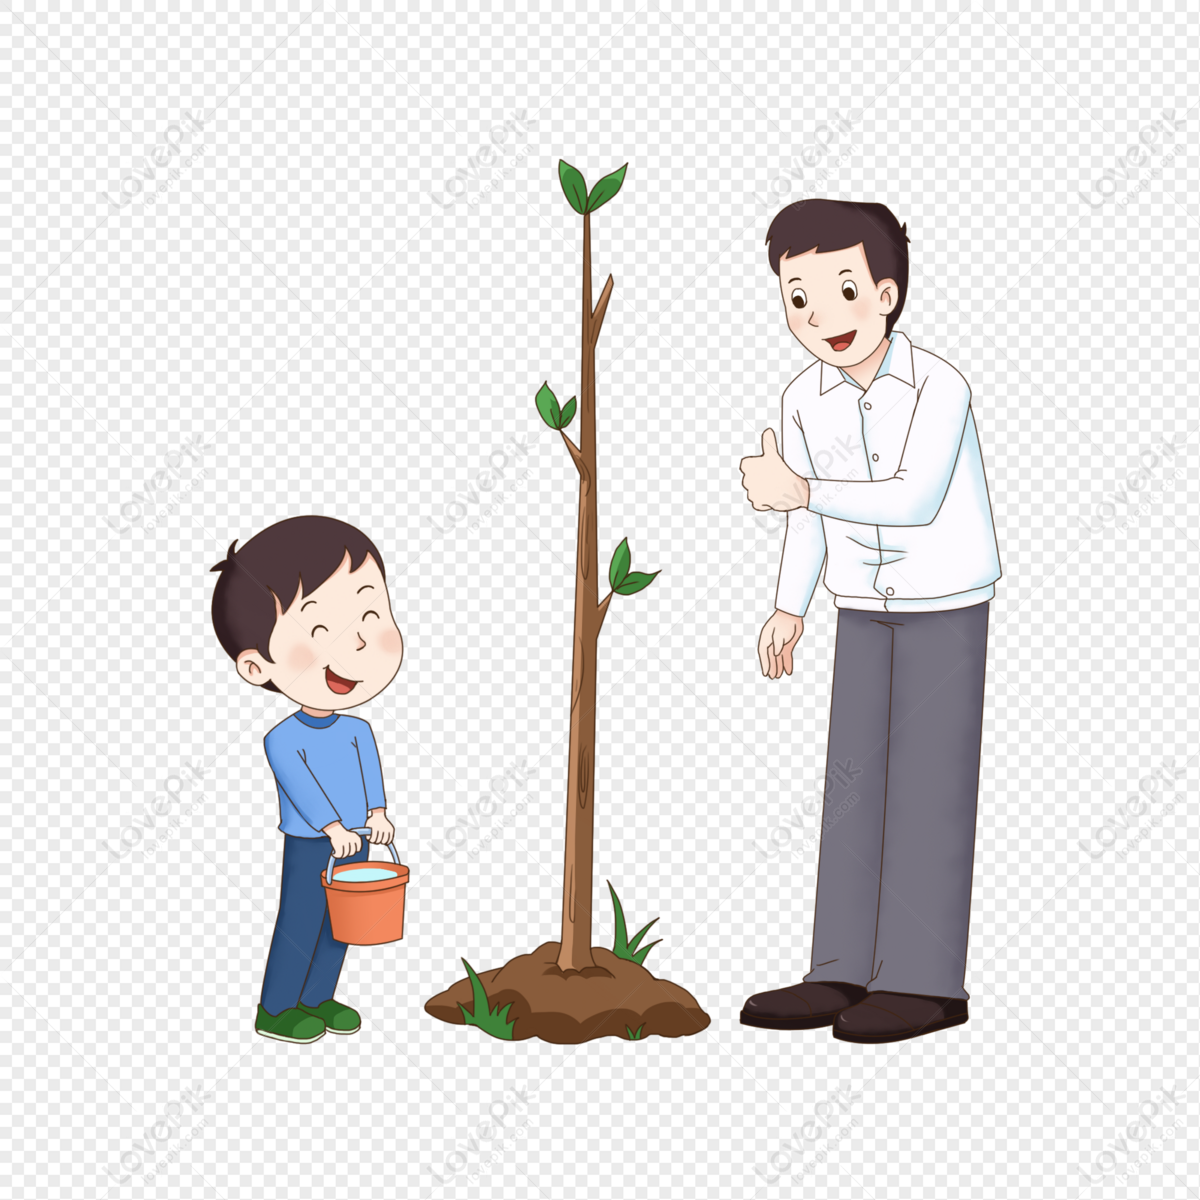 Spring Teacher With Students Planting Tree Cartoon Elements PNG Free  Download And Clipart Image For Free Download - Lovepik | 401679703